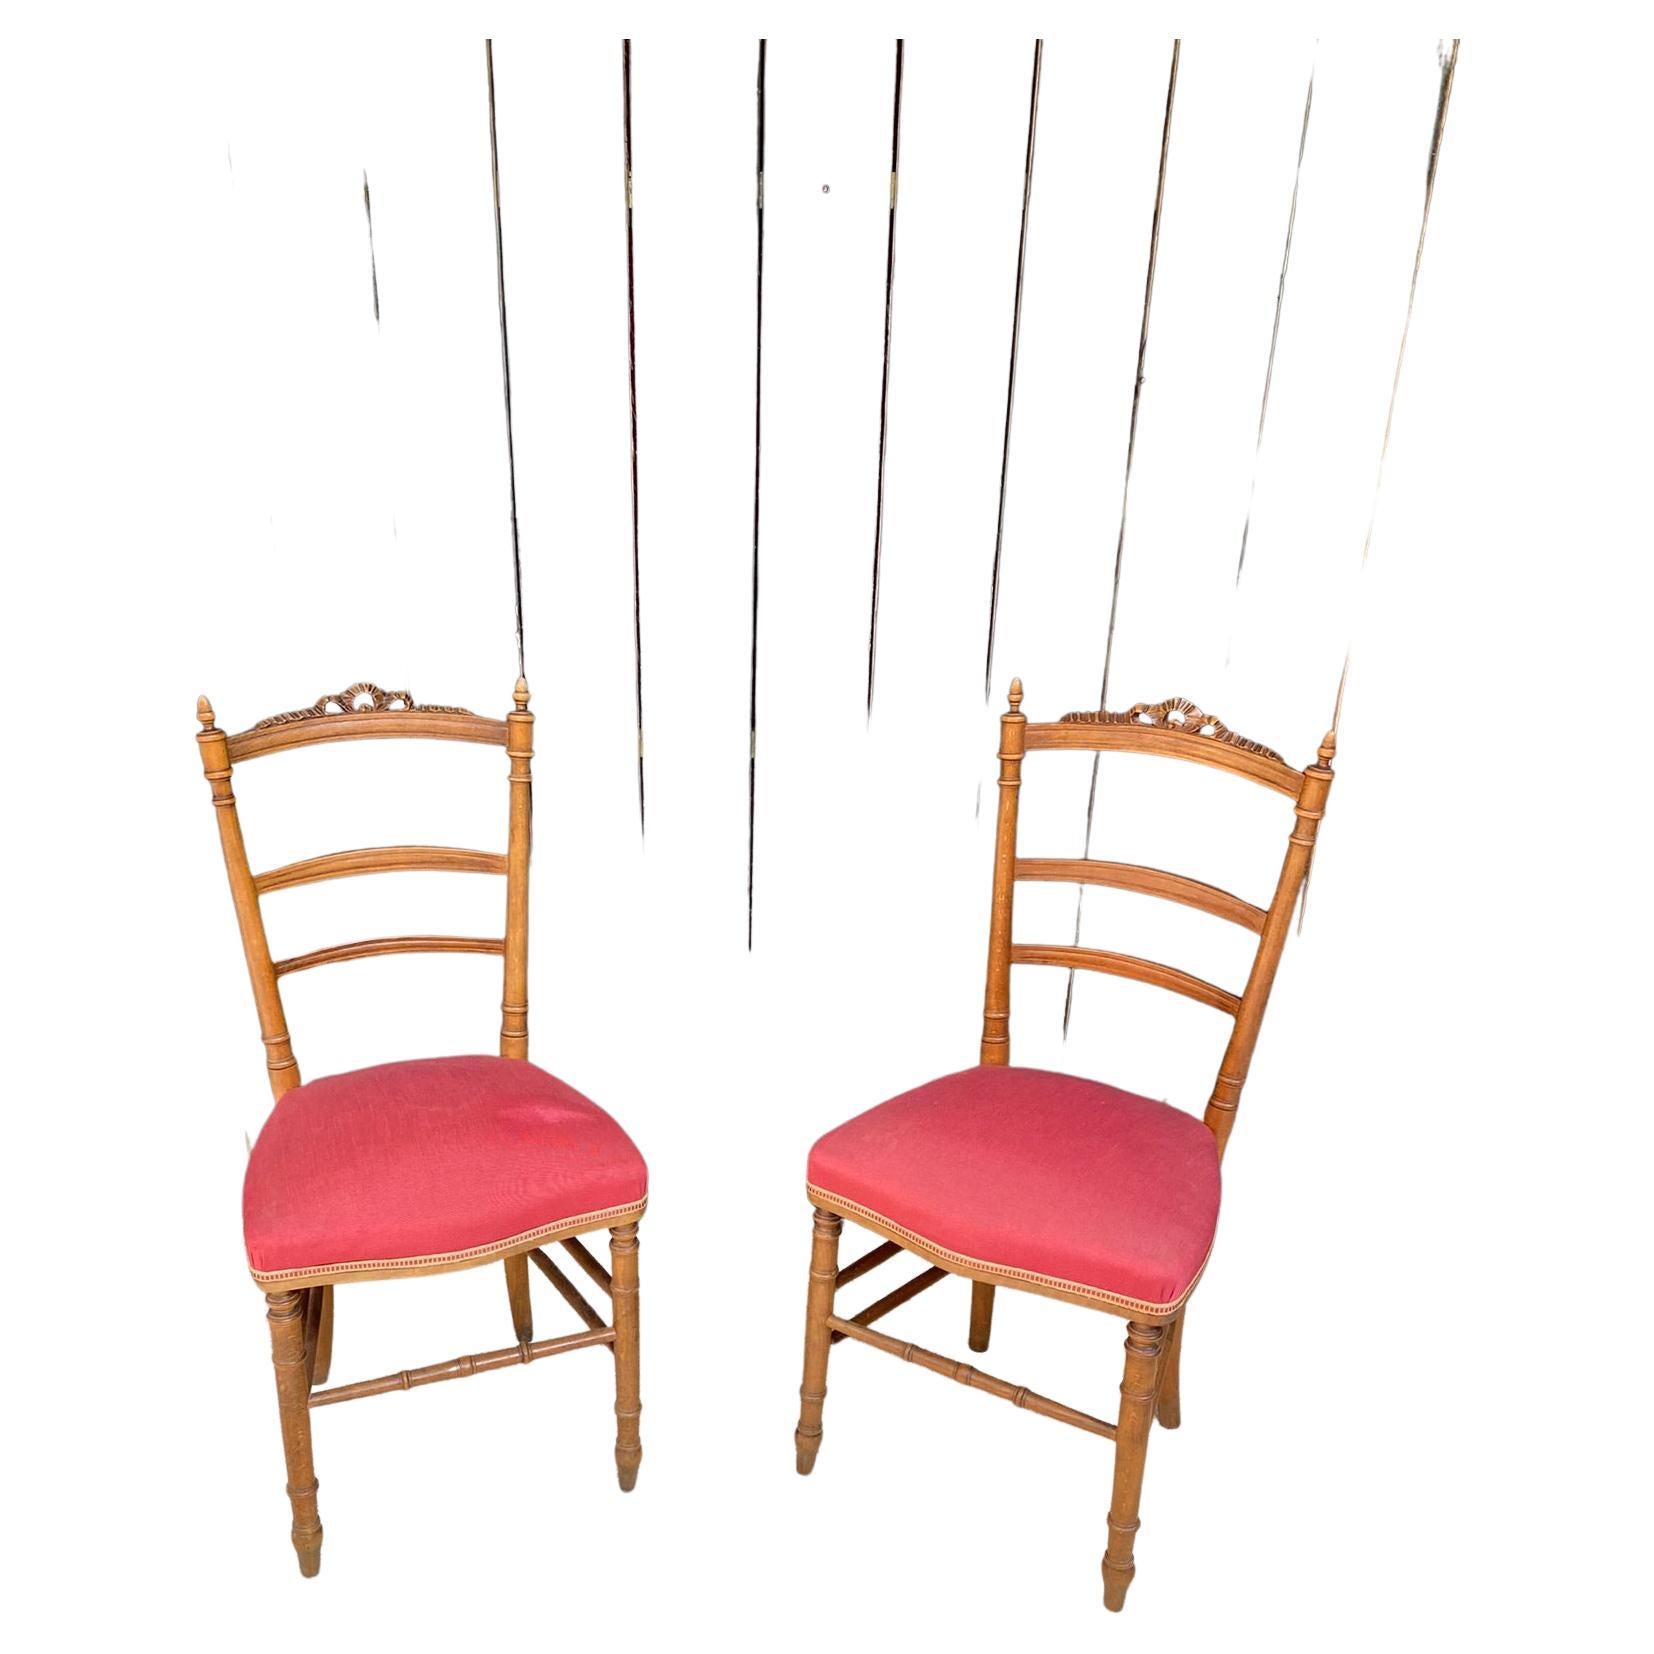 2 Original Napoleon III Chairs, France, 1850s For Sale